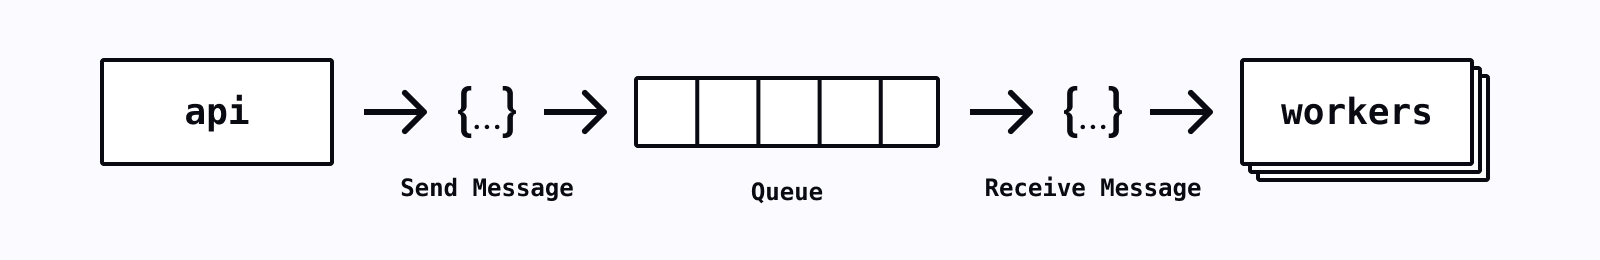 Graphic of an API, a queue and workers and messages being send and received